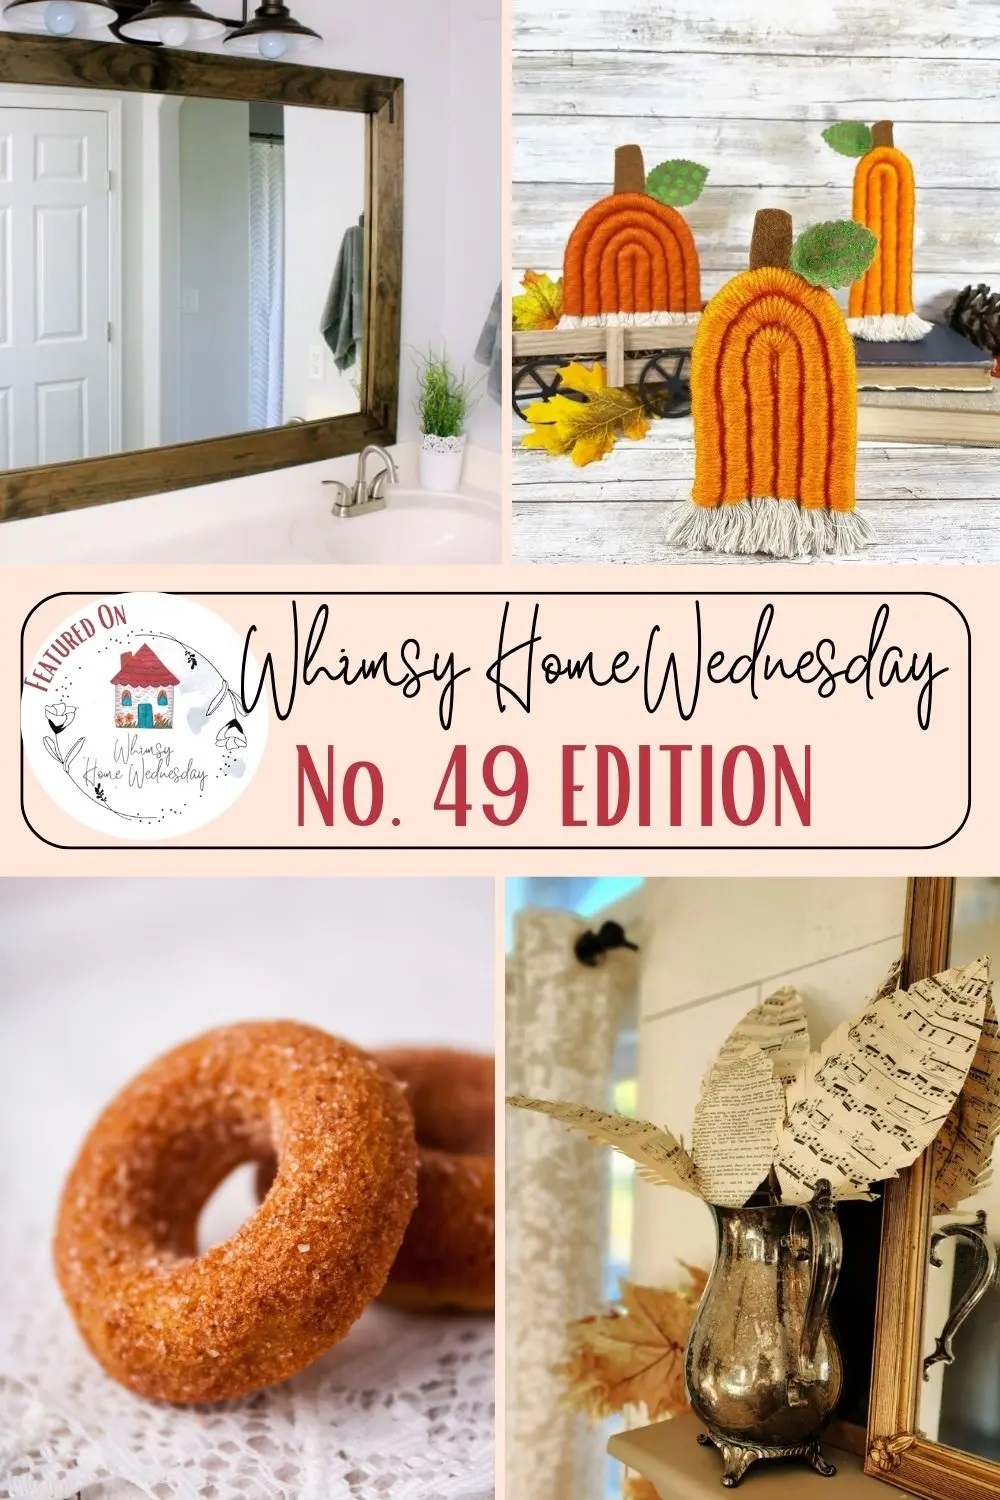 Join us on Whimsy Home Wednesday Blog Link Party No. 49 and see host projects, the features from the previous week and link up your posts!